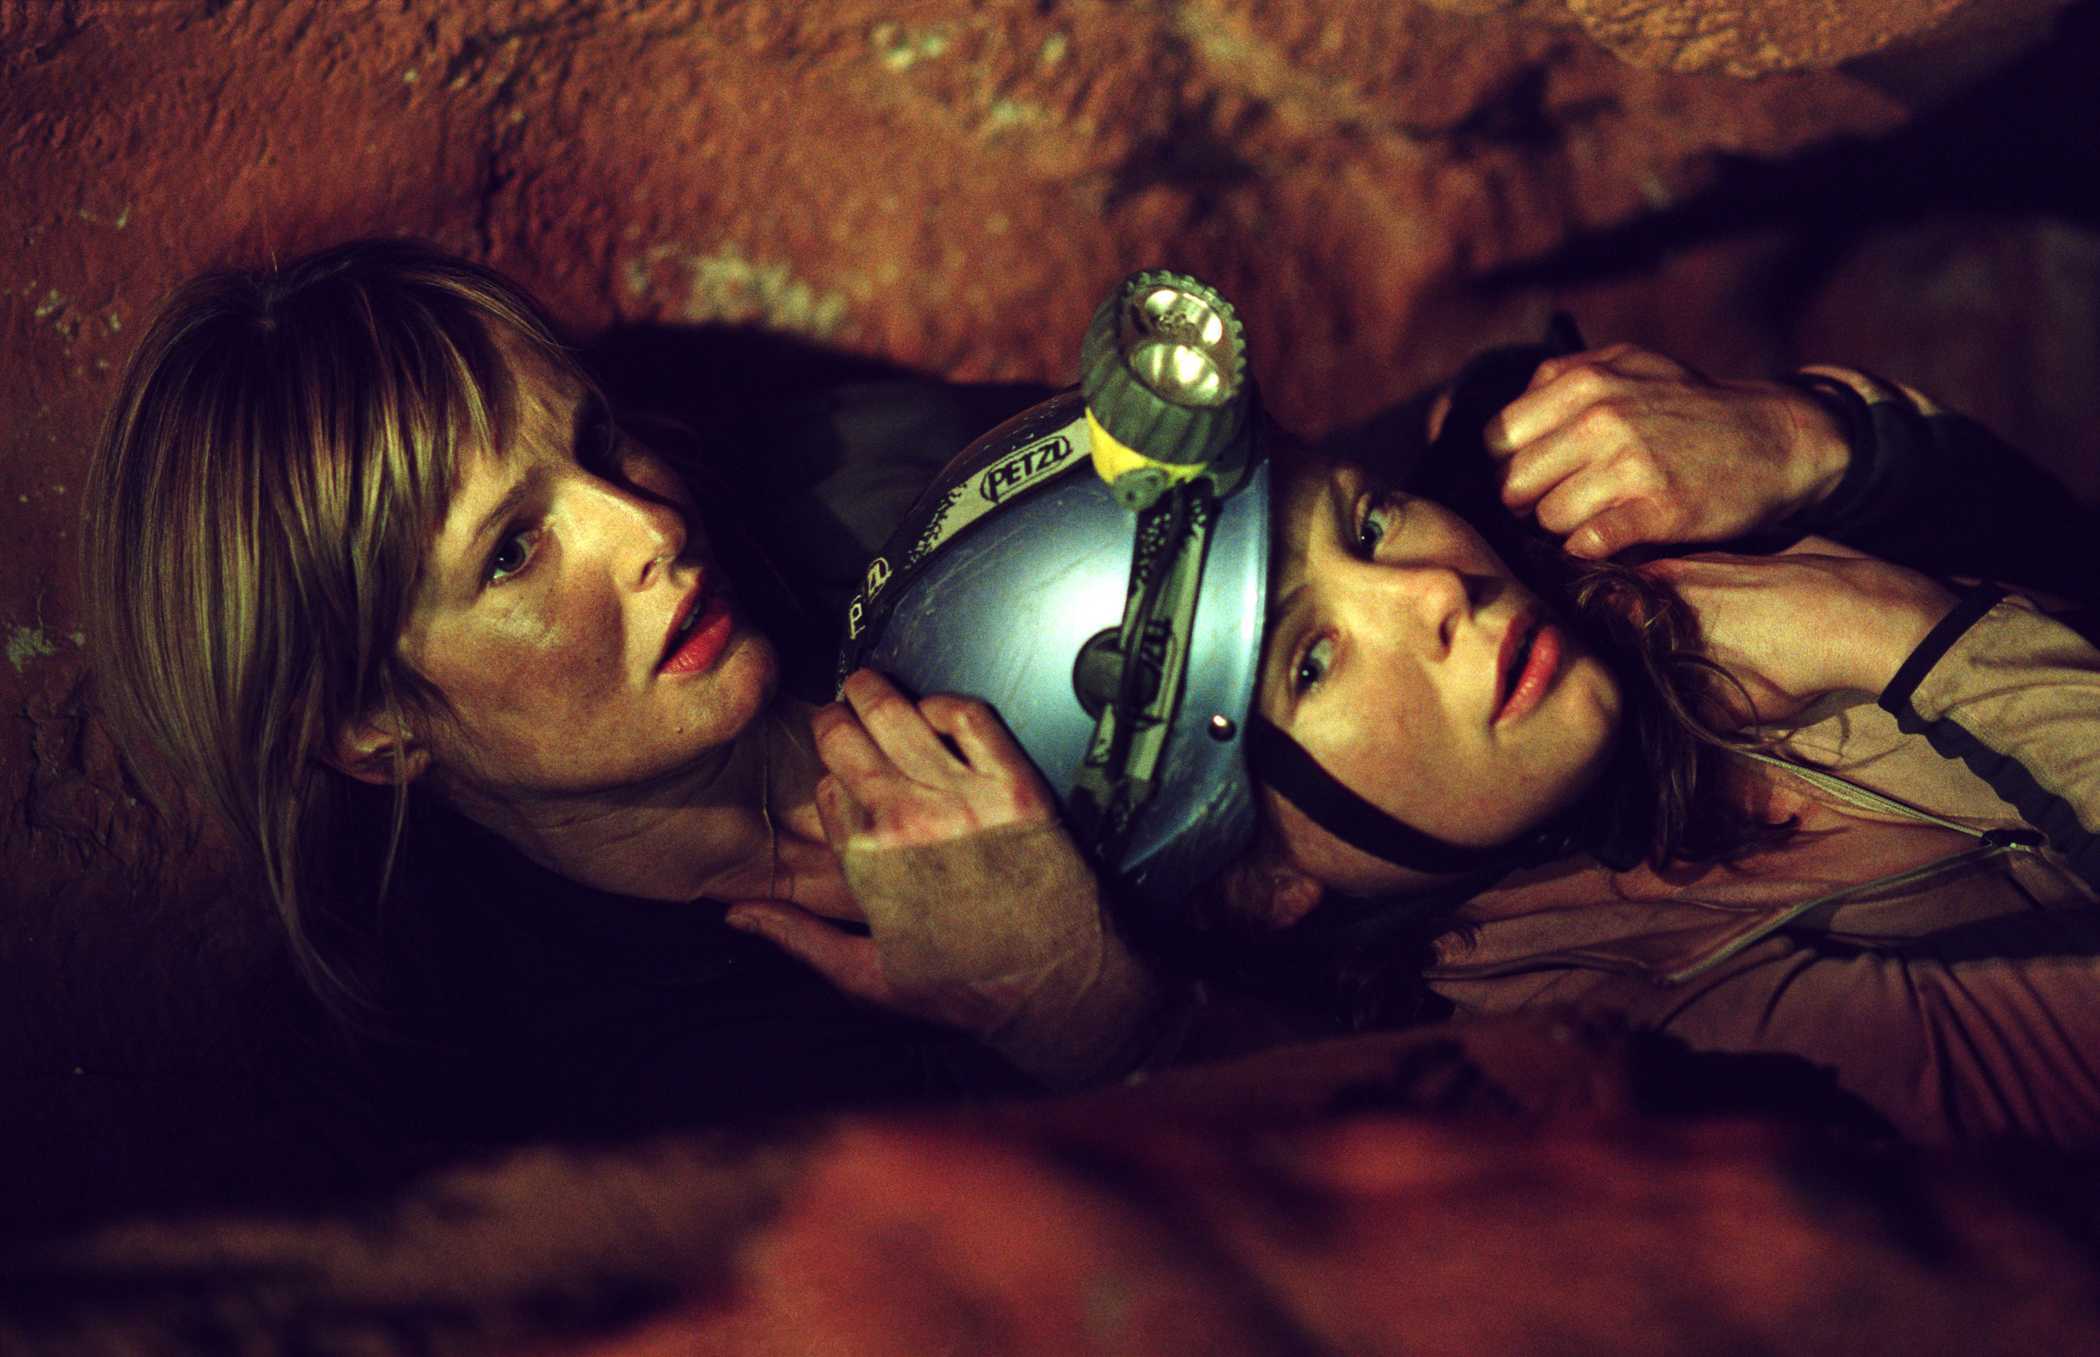 The Descent (2005) Buring Photo